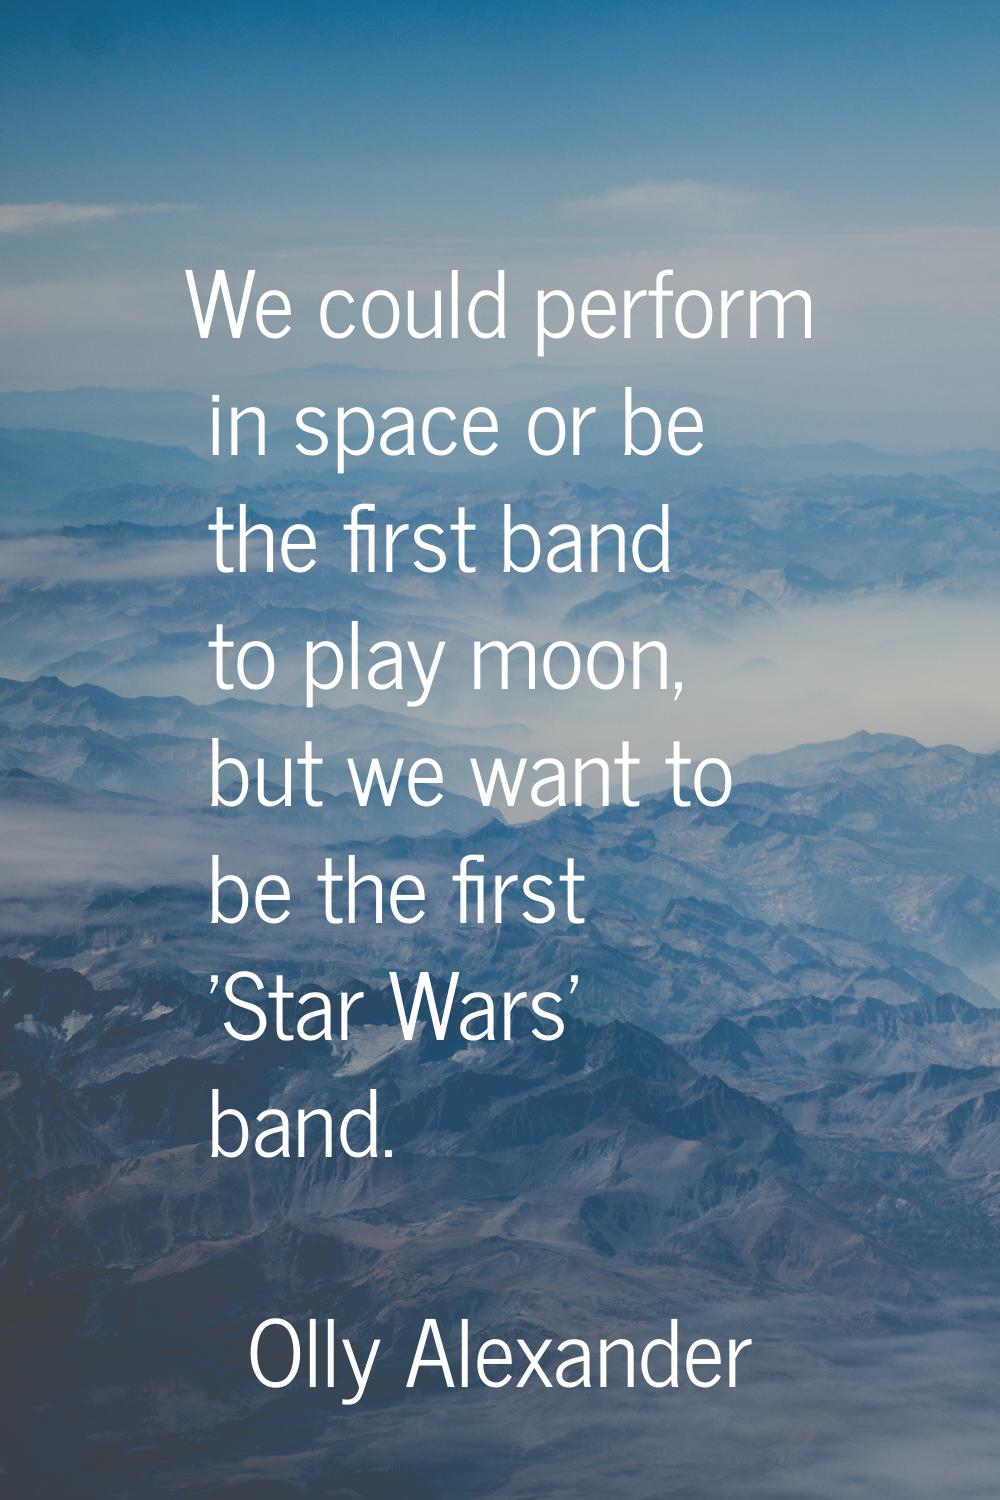 We could perform in space or be the first band to play moon, but we want to be the first 'Star Wars